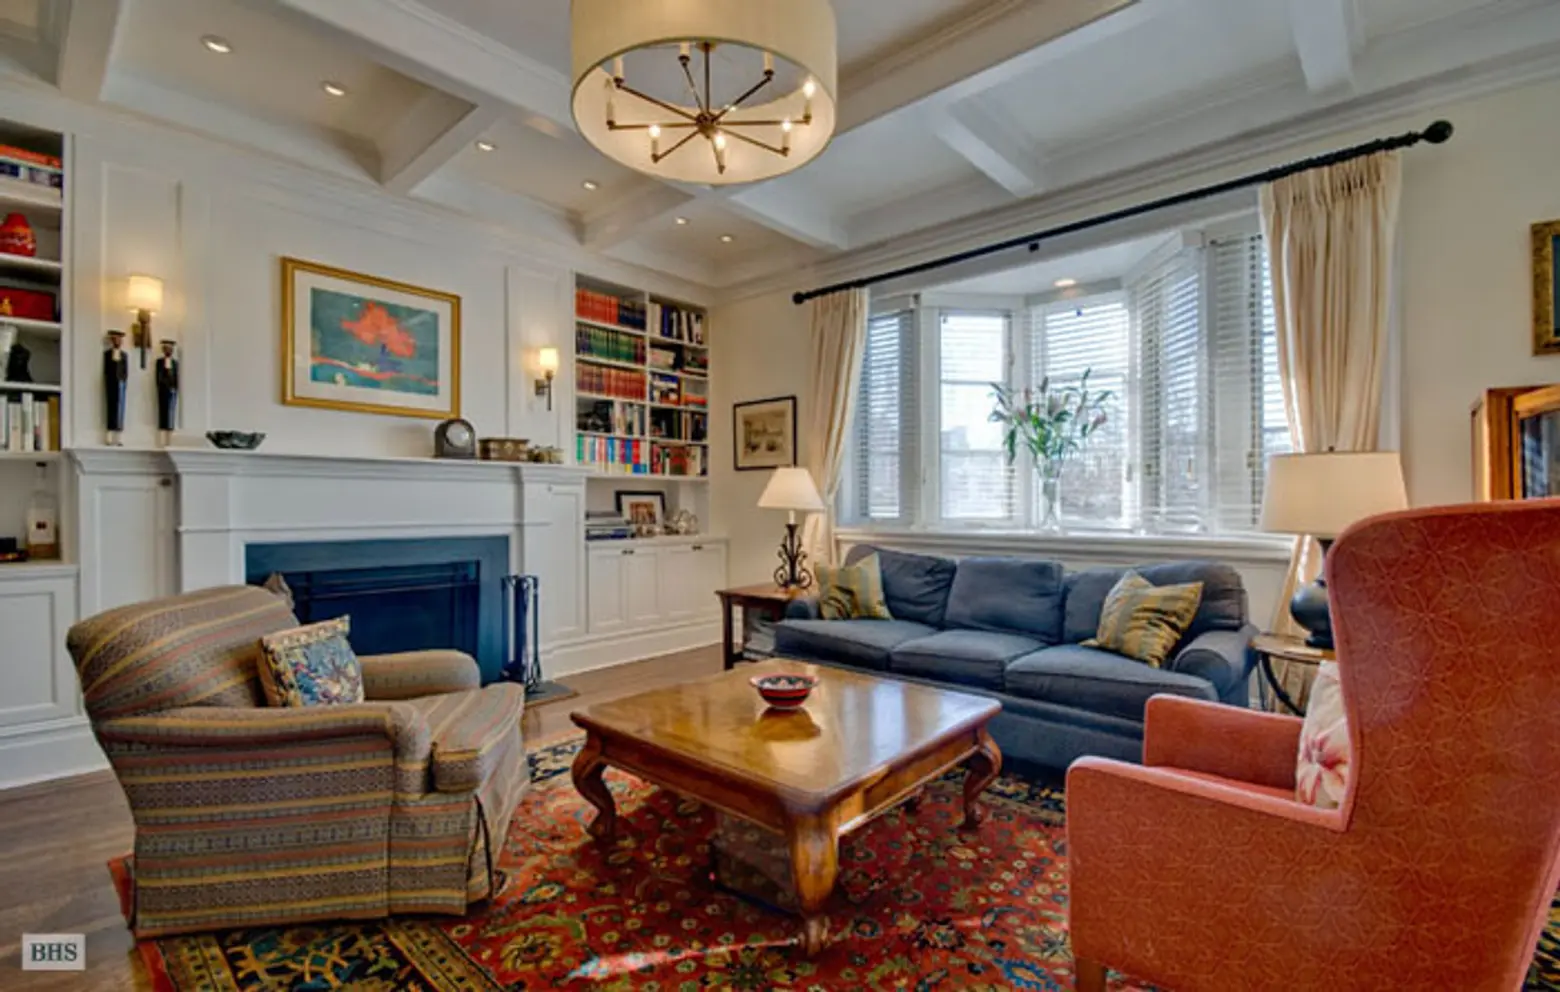 $2.7M Countrified Brooklyn Heights Pad Offers the Best of Both Worlds